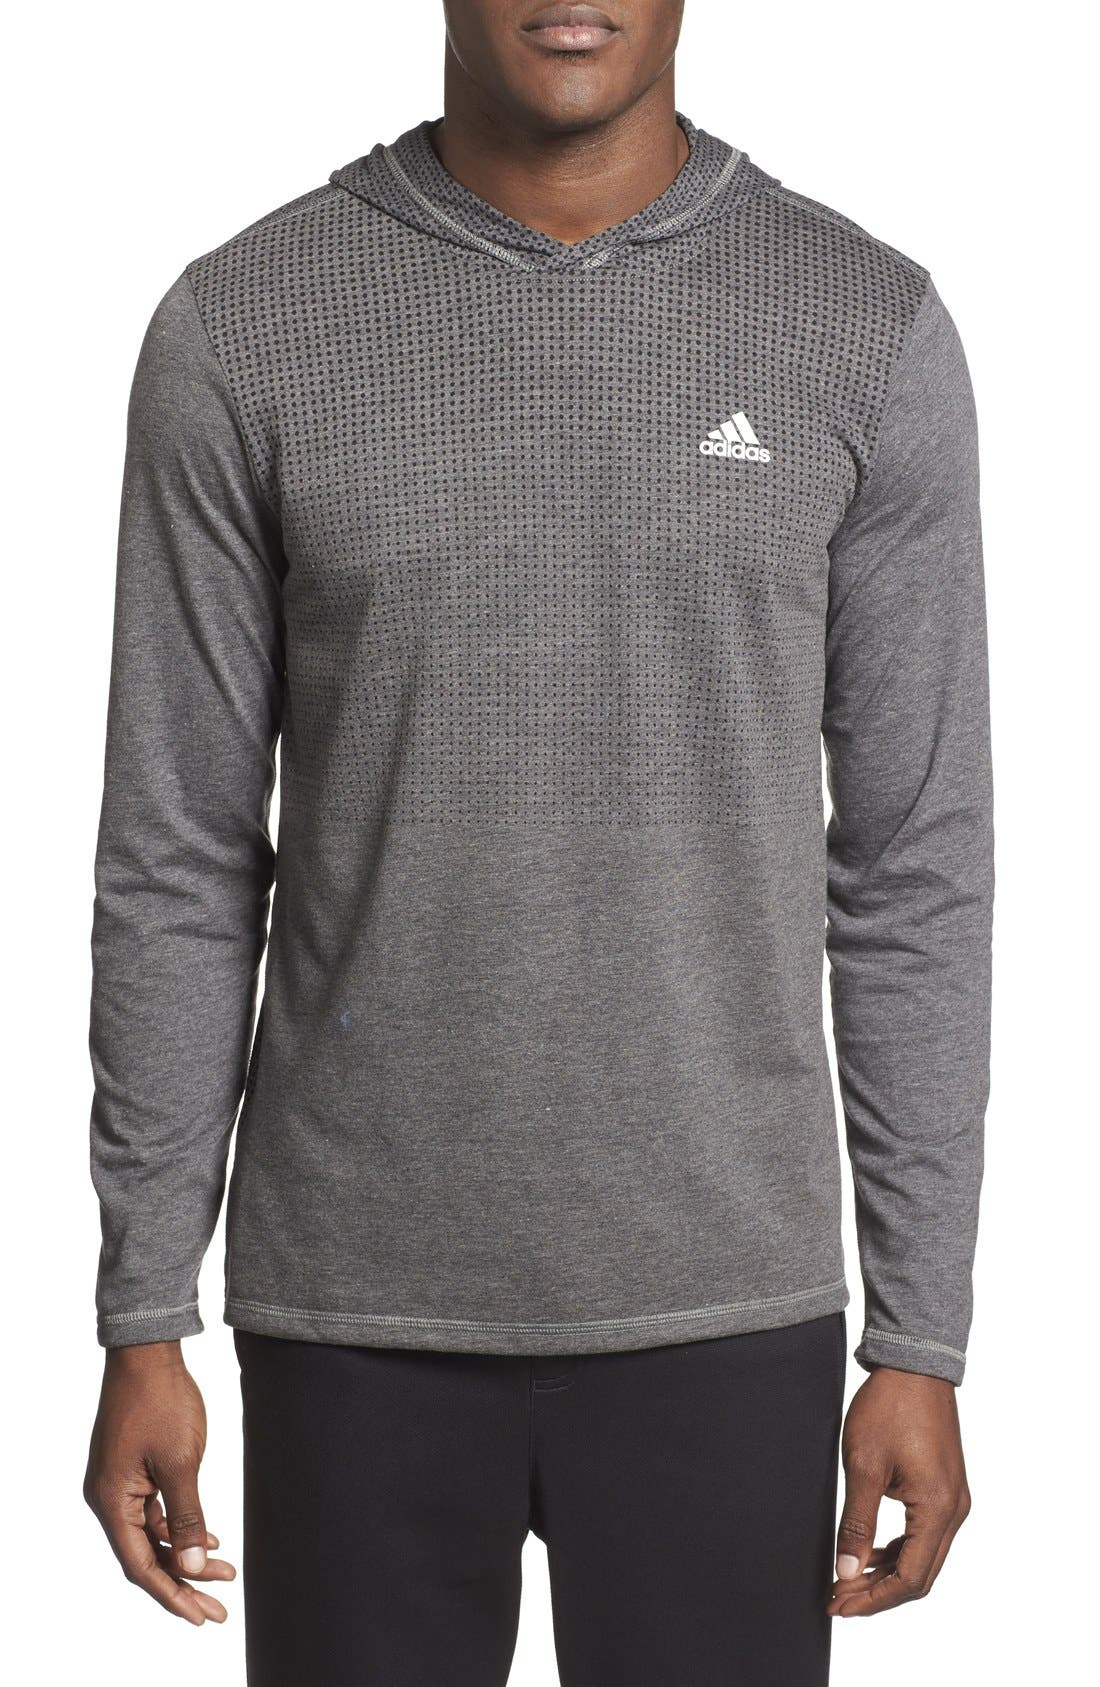 adidas climacool pullover